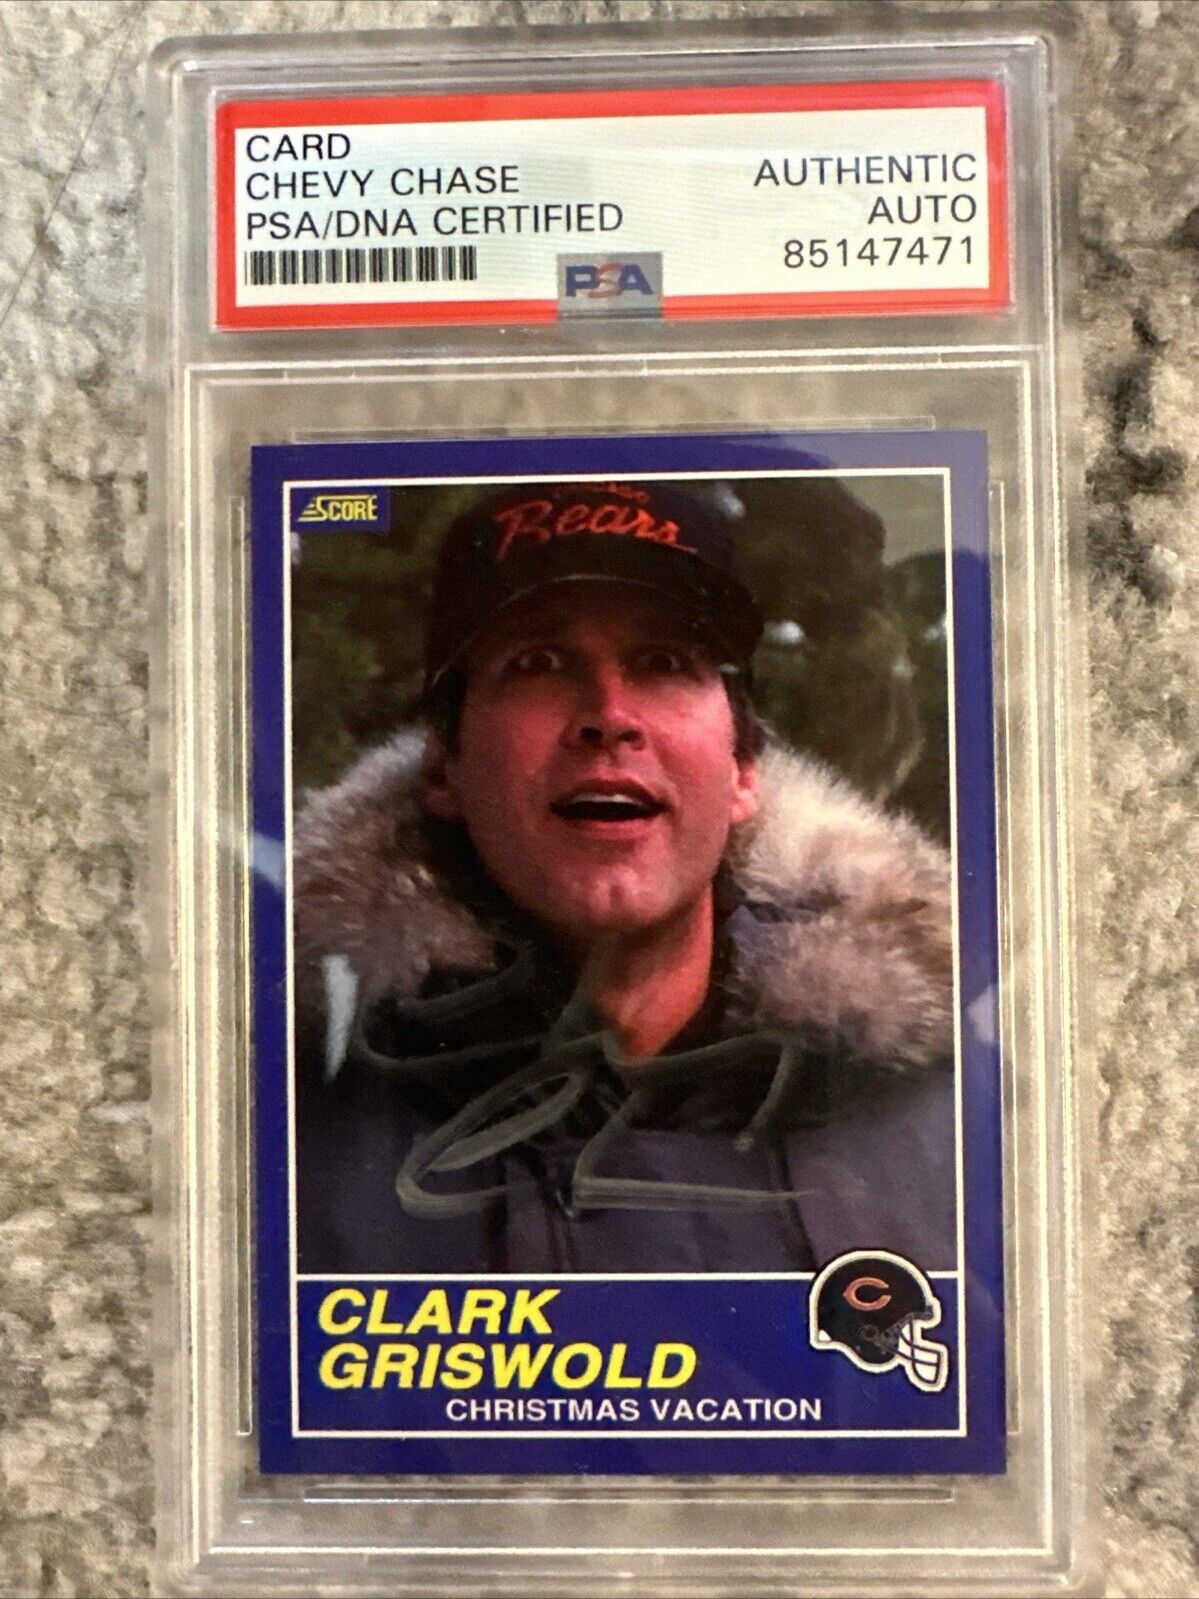 Chevy Chase Autograph 'Clark Griswold' Christmas Vacation PSA/DNA Certified